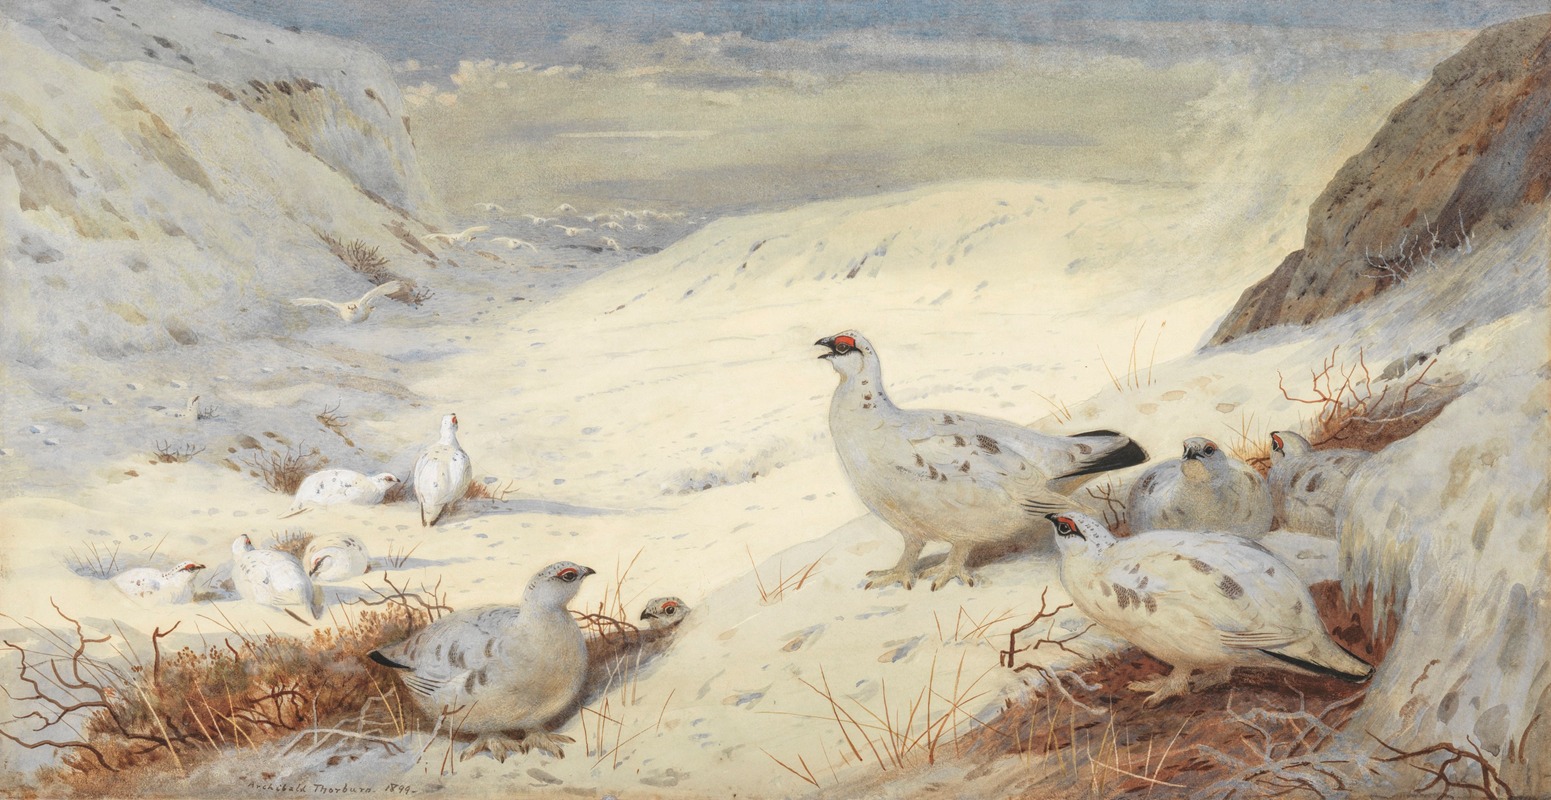 Archibald Thorburn - Ptarmigan in winter plumage signed and dated ‘Archibald Thorburn. 1899